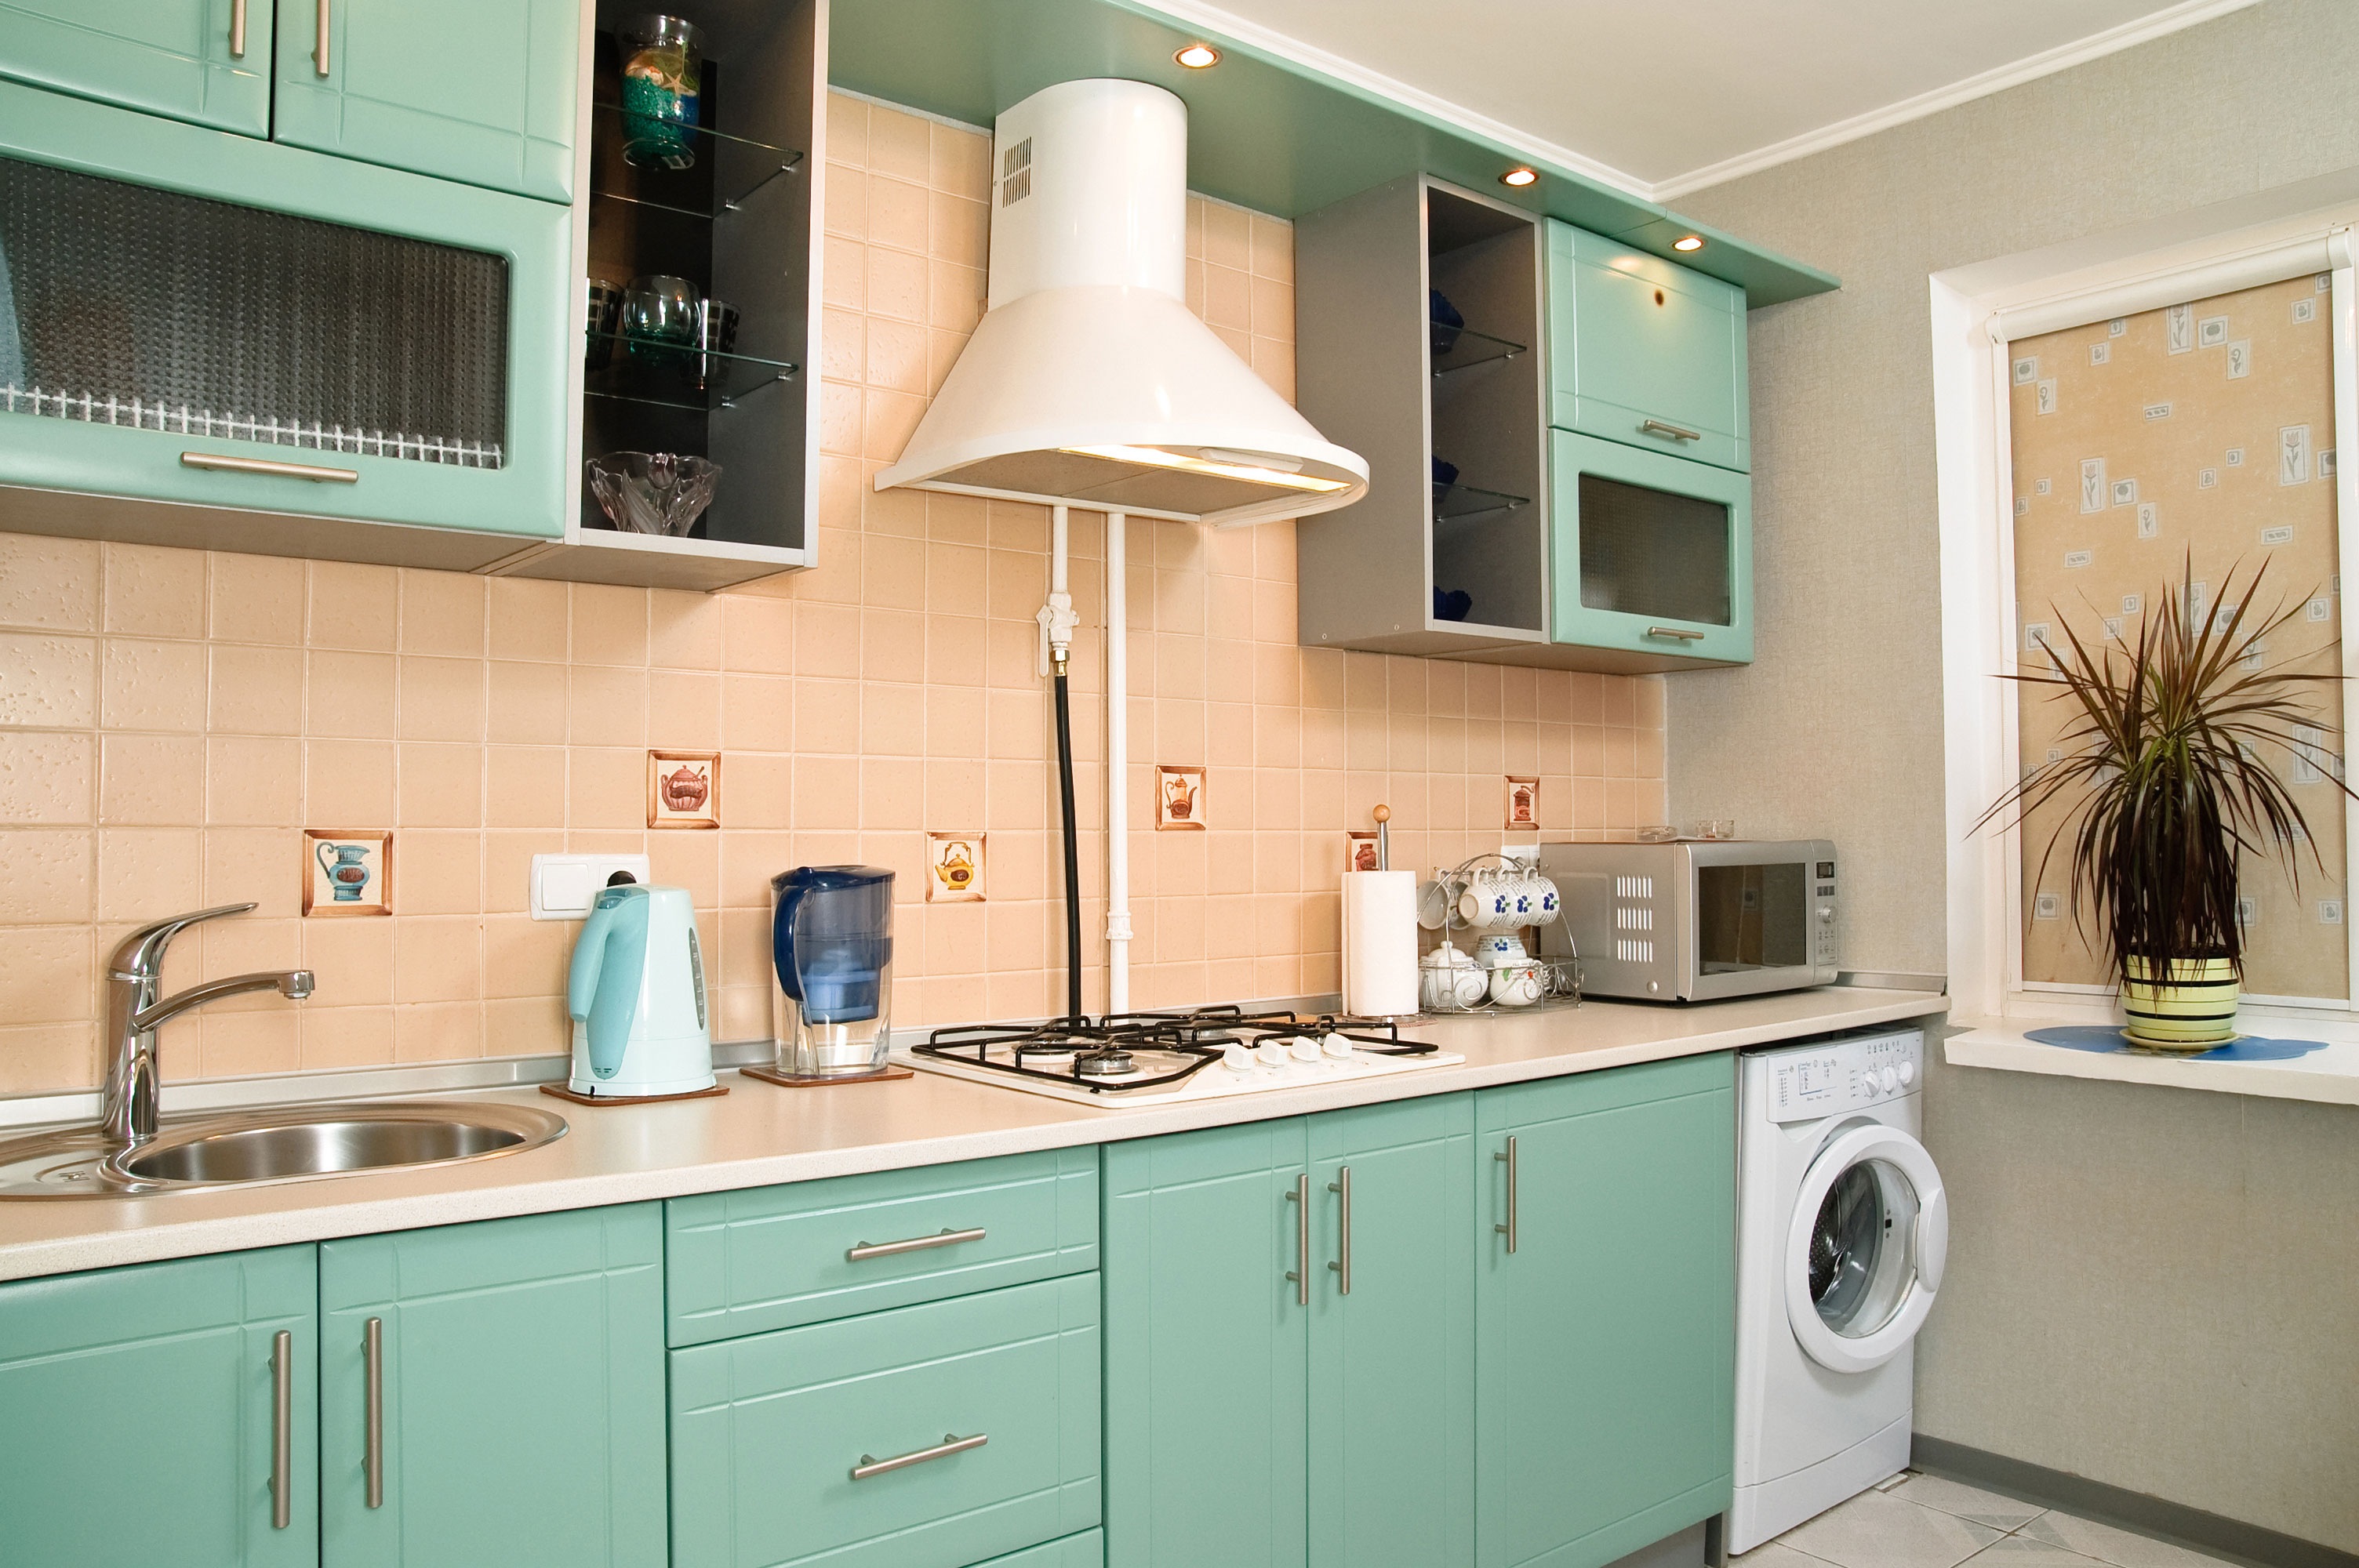 Breezy retro kitchen in a subtle shade of mint